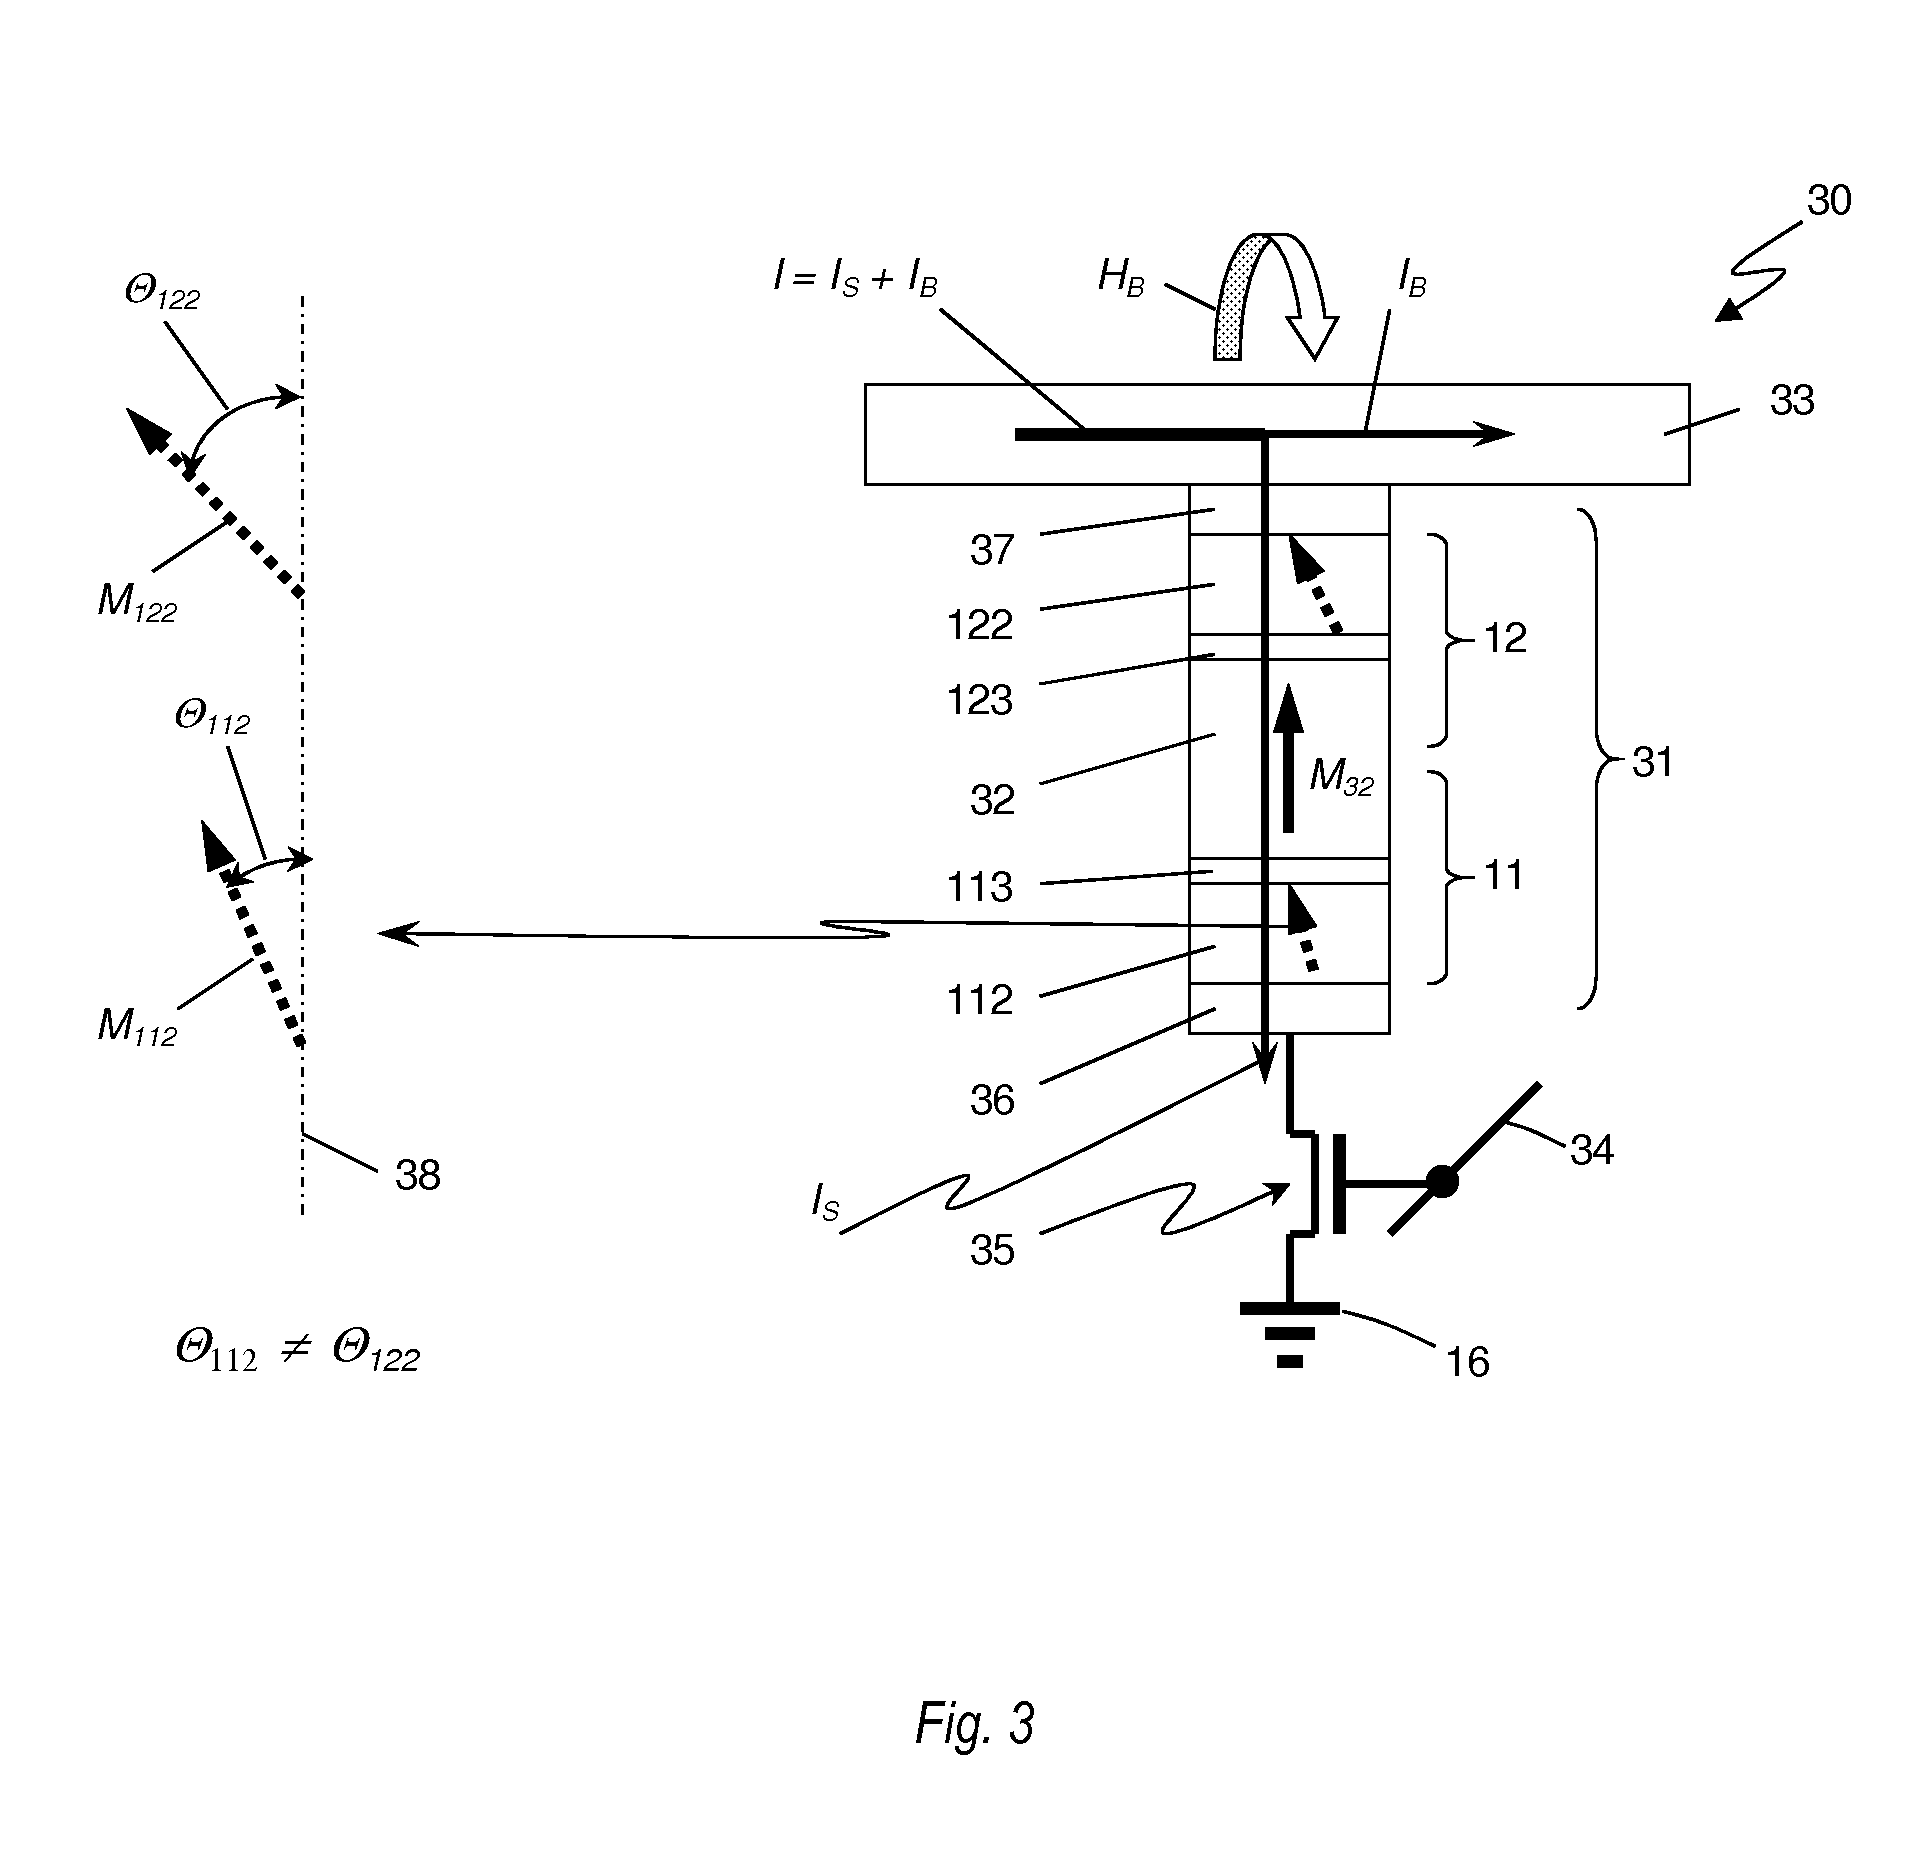 Multibit Cell of Magnetic Random Access Memory with Perpendicular Magnetization